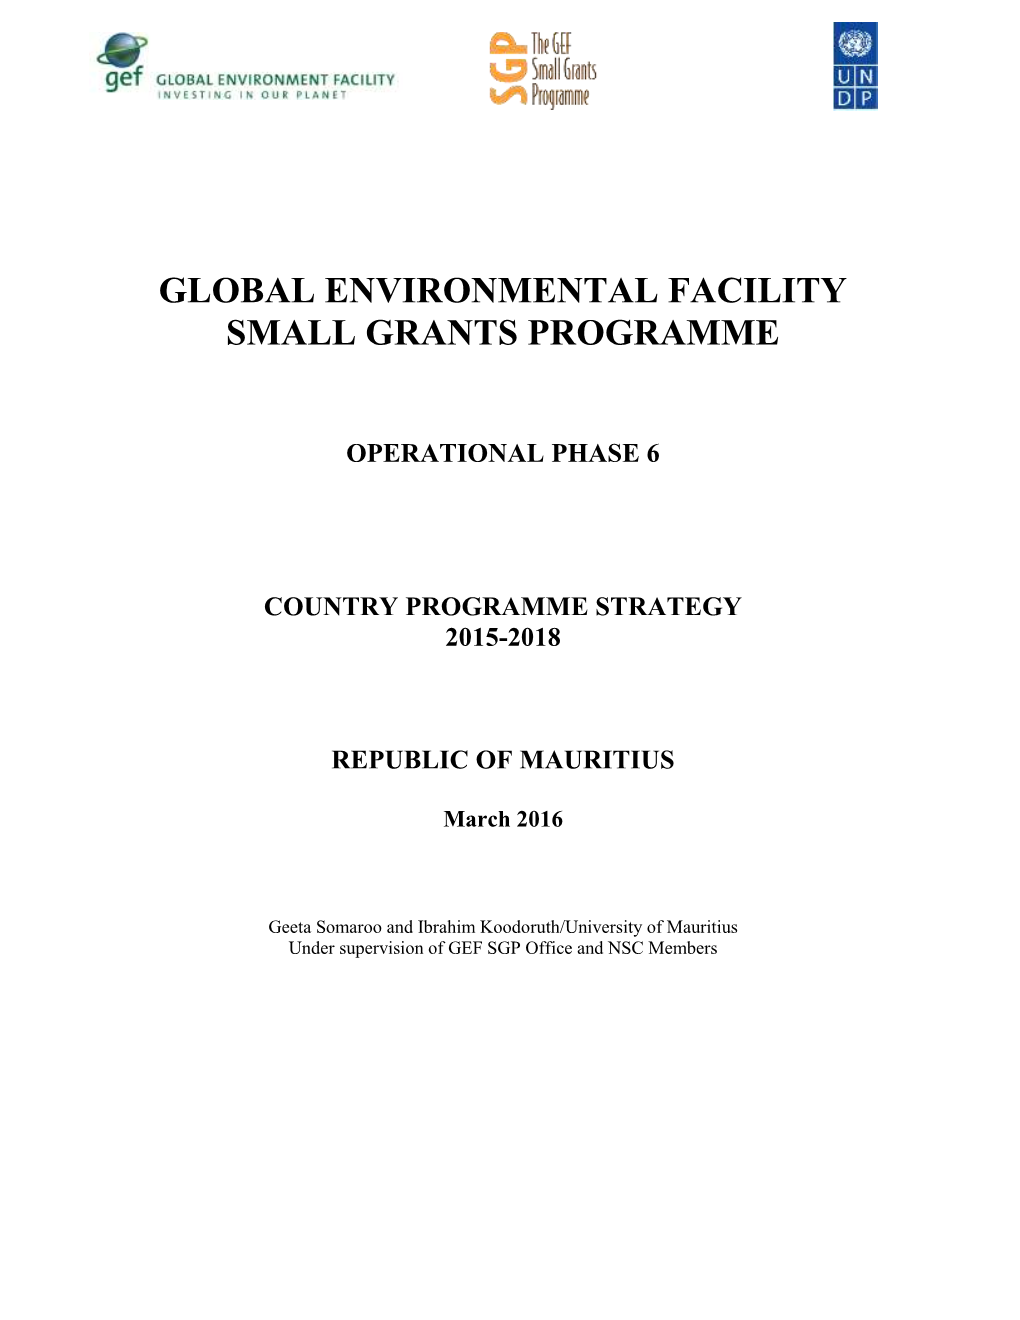 OP6 SGP Mauritius Country Programme Strategy